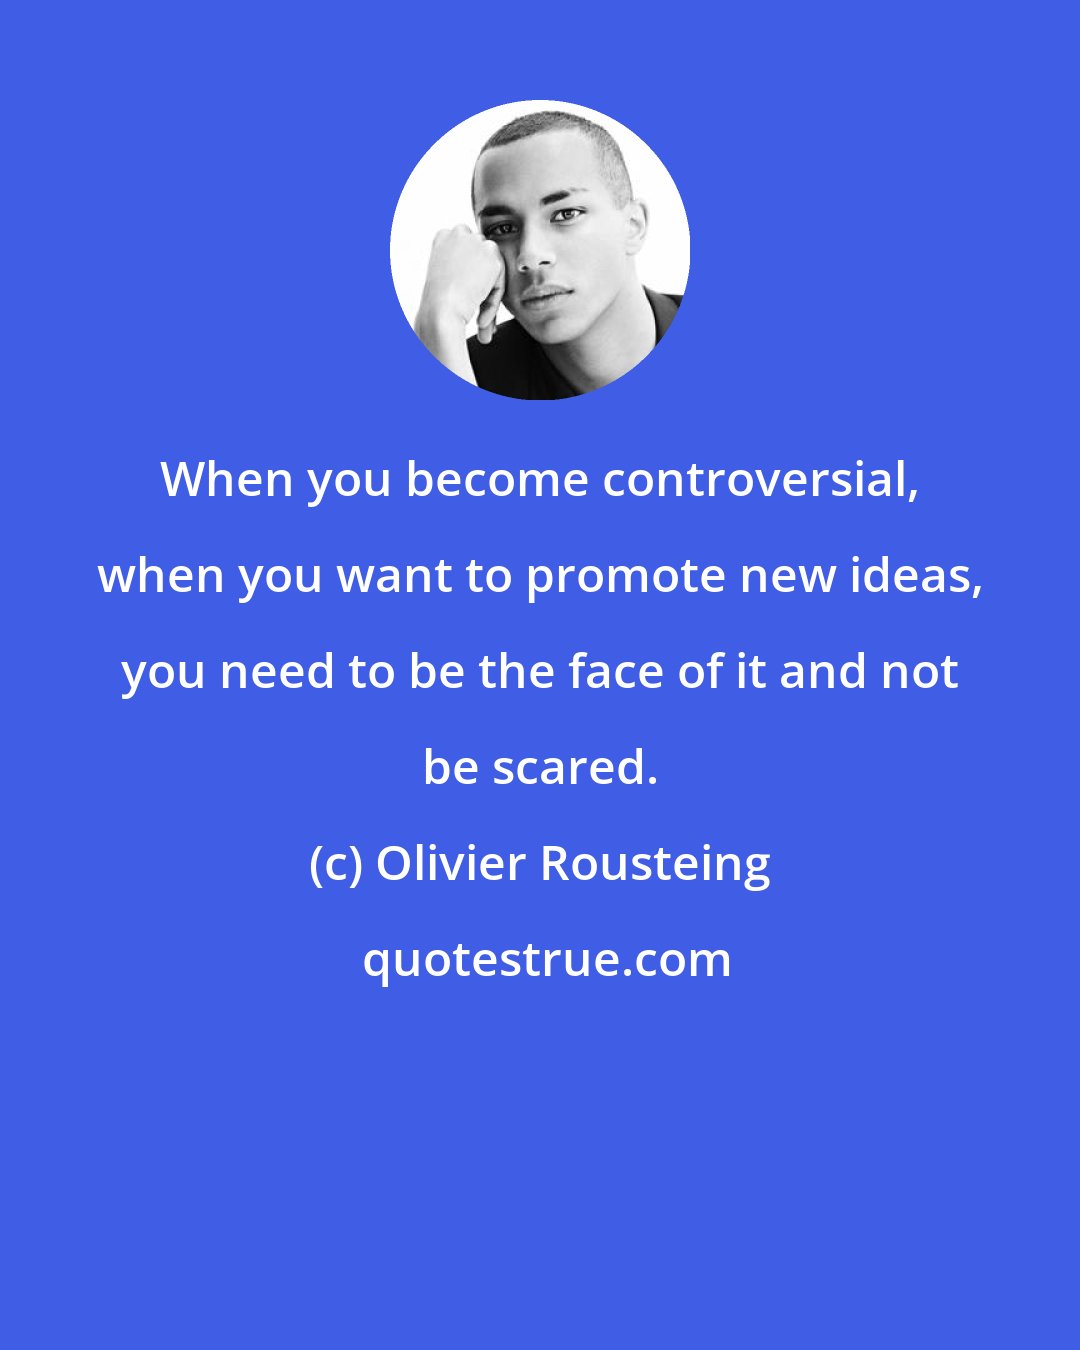 Olivier Rousteing: When you become controversial, when you want to promote new ideas, you need to be the face of it and not be scared.